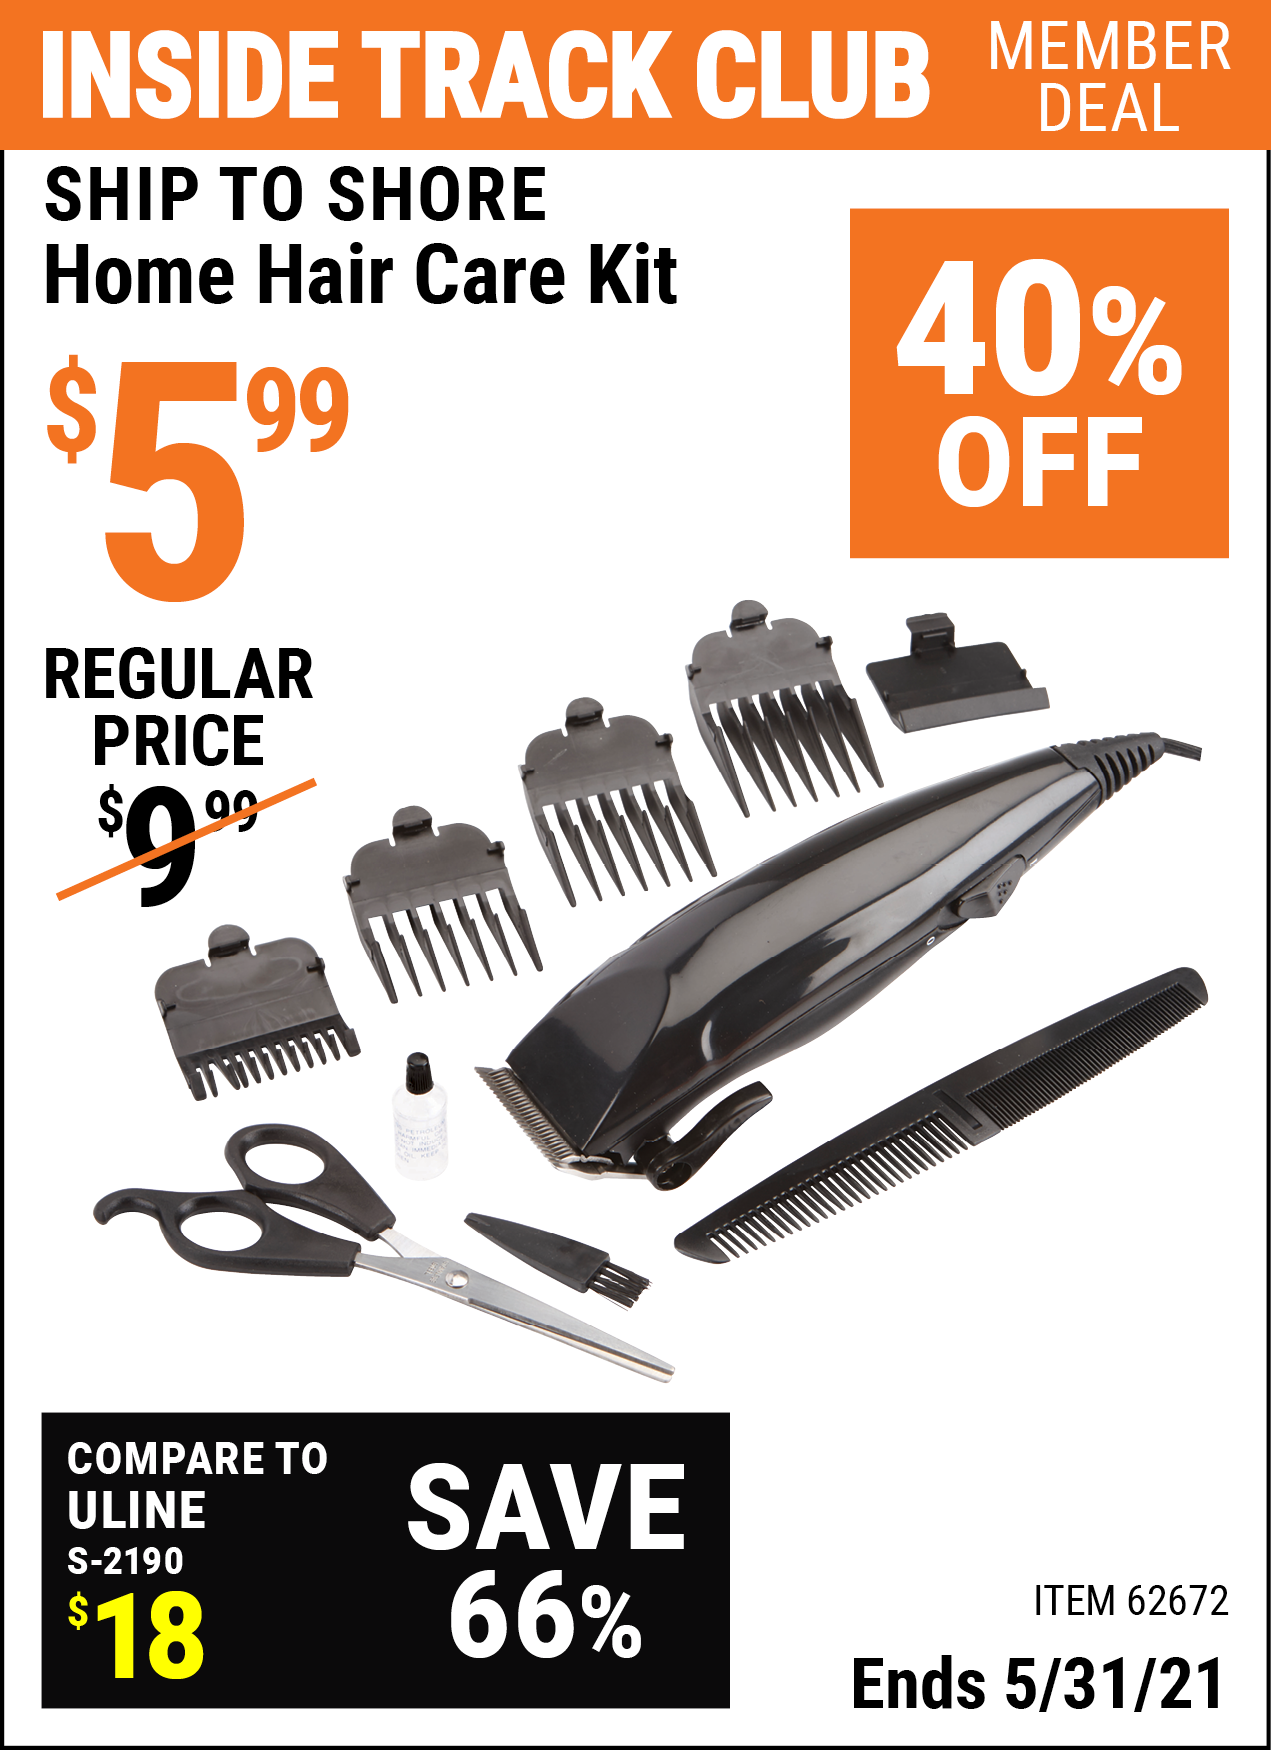 SHIP TO SHORE Home Hair Care Kit for $ – Harbor Freight Coupons